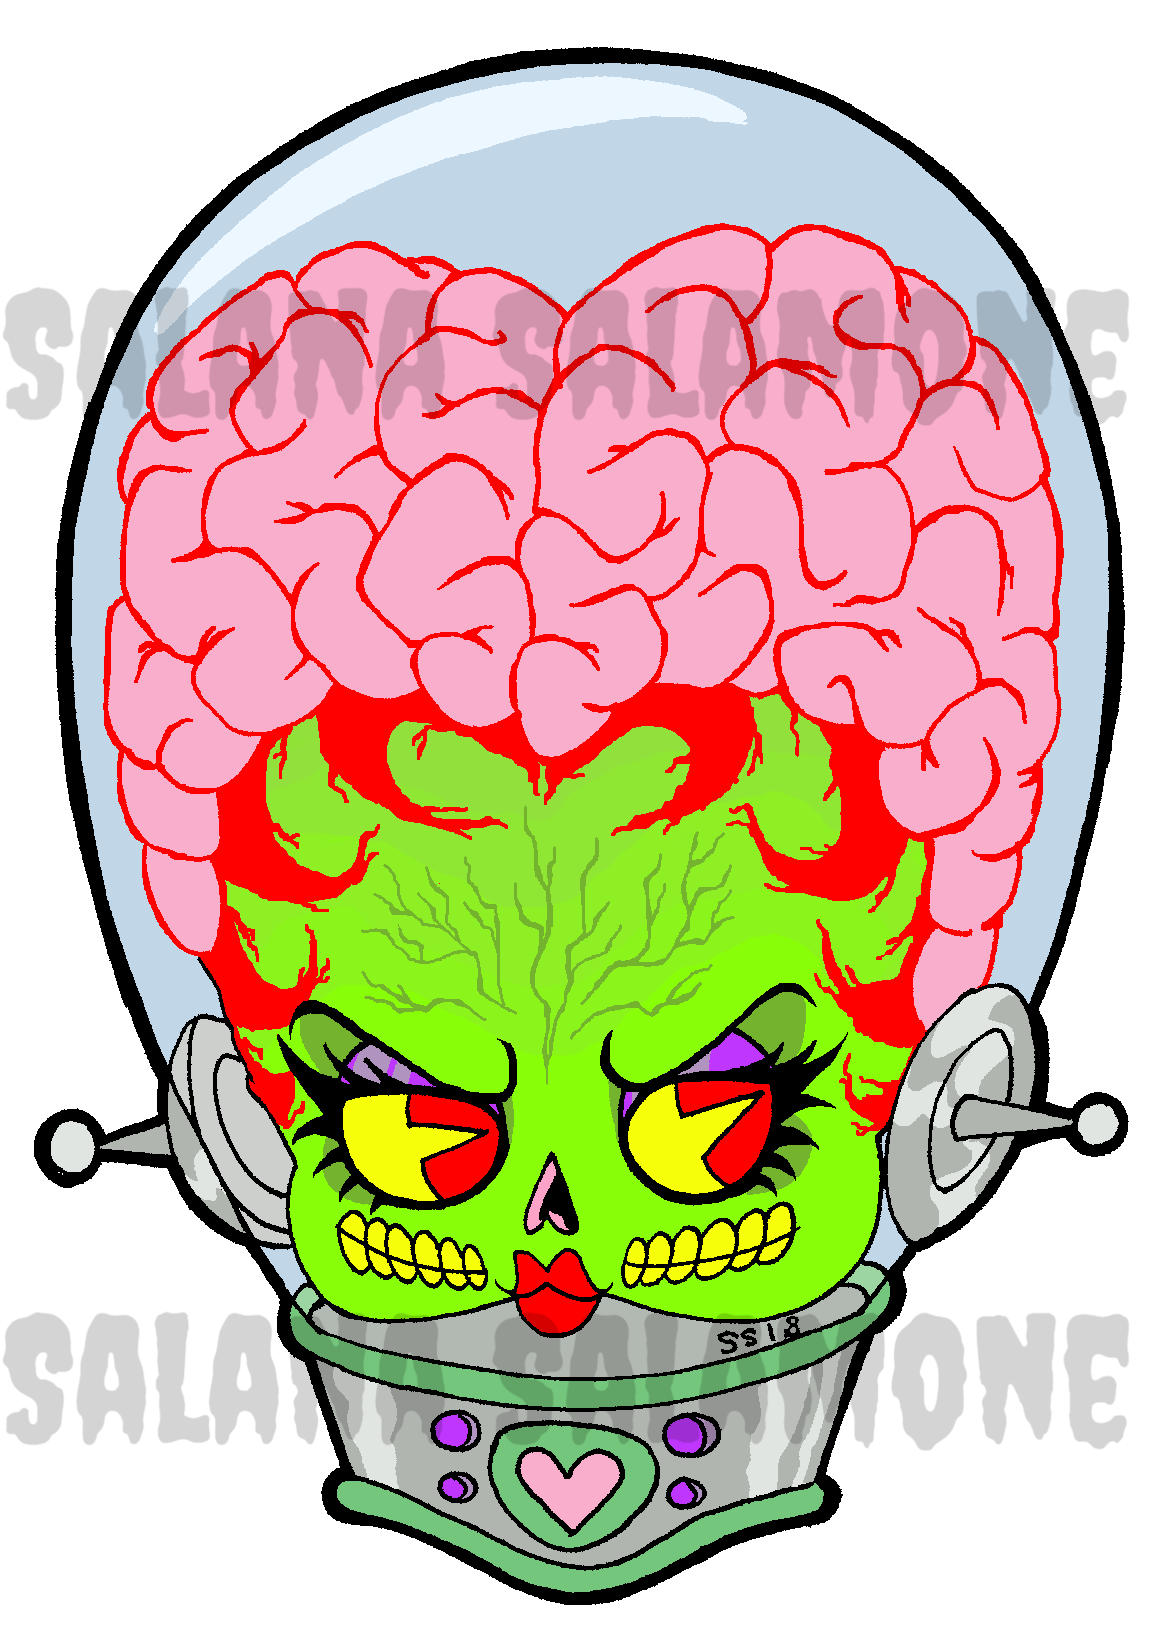 Mars Attacks Betty, by Salana Salamone Available as a t shirt and more at my teepublic — Immediately post your art to a topic and get feedback. Join our new community, EatSleepDraw Studio, today!